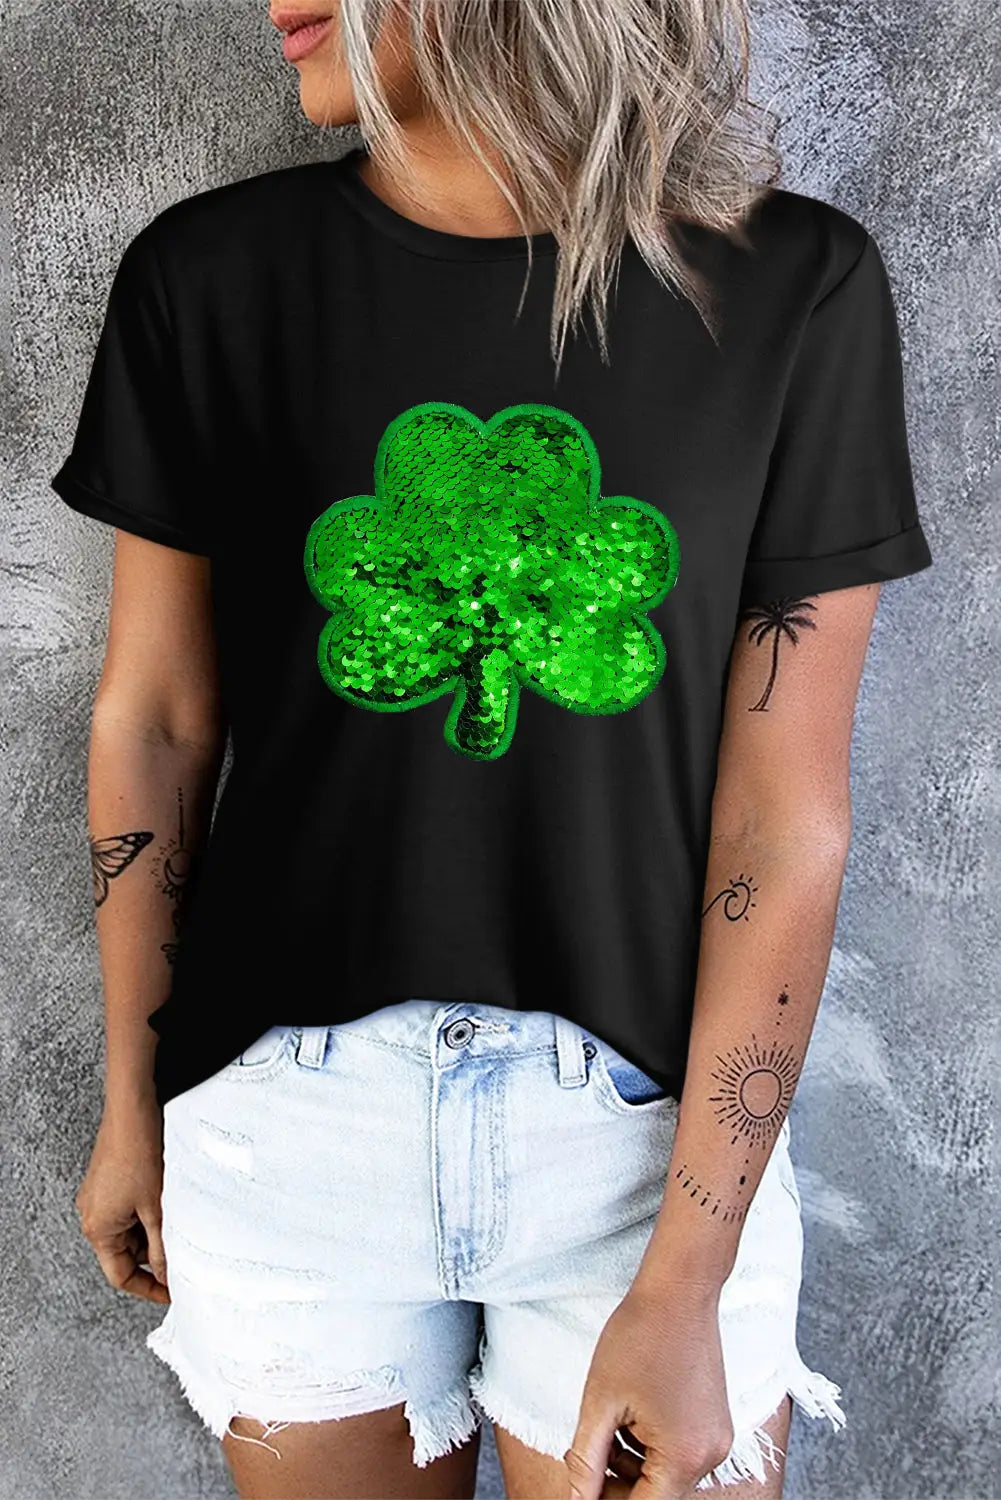 Black sequin clover embroidered round neck graphic tee - s / 62% polyester + 32% cotton + 6% elastane - t-shirts